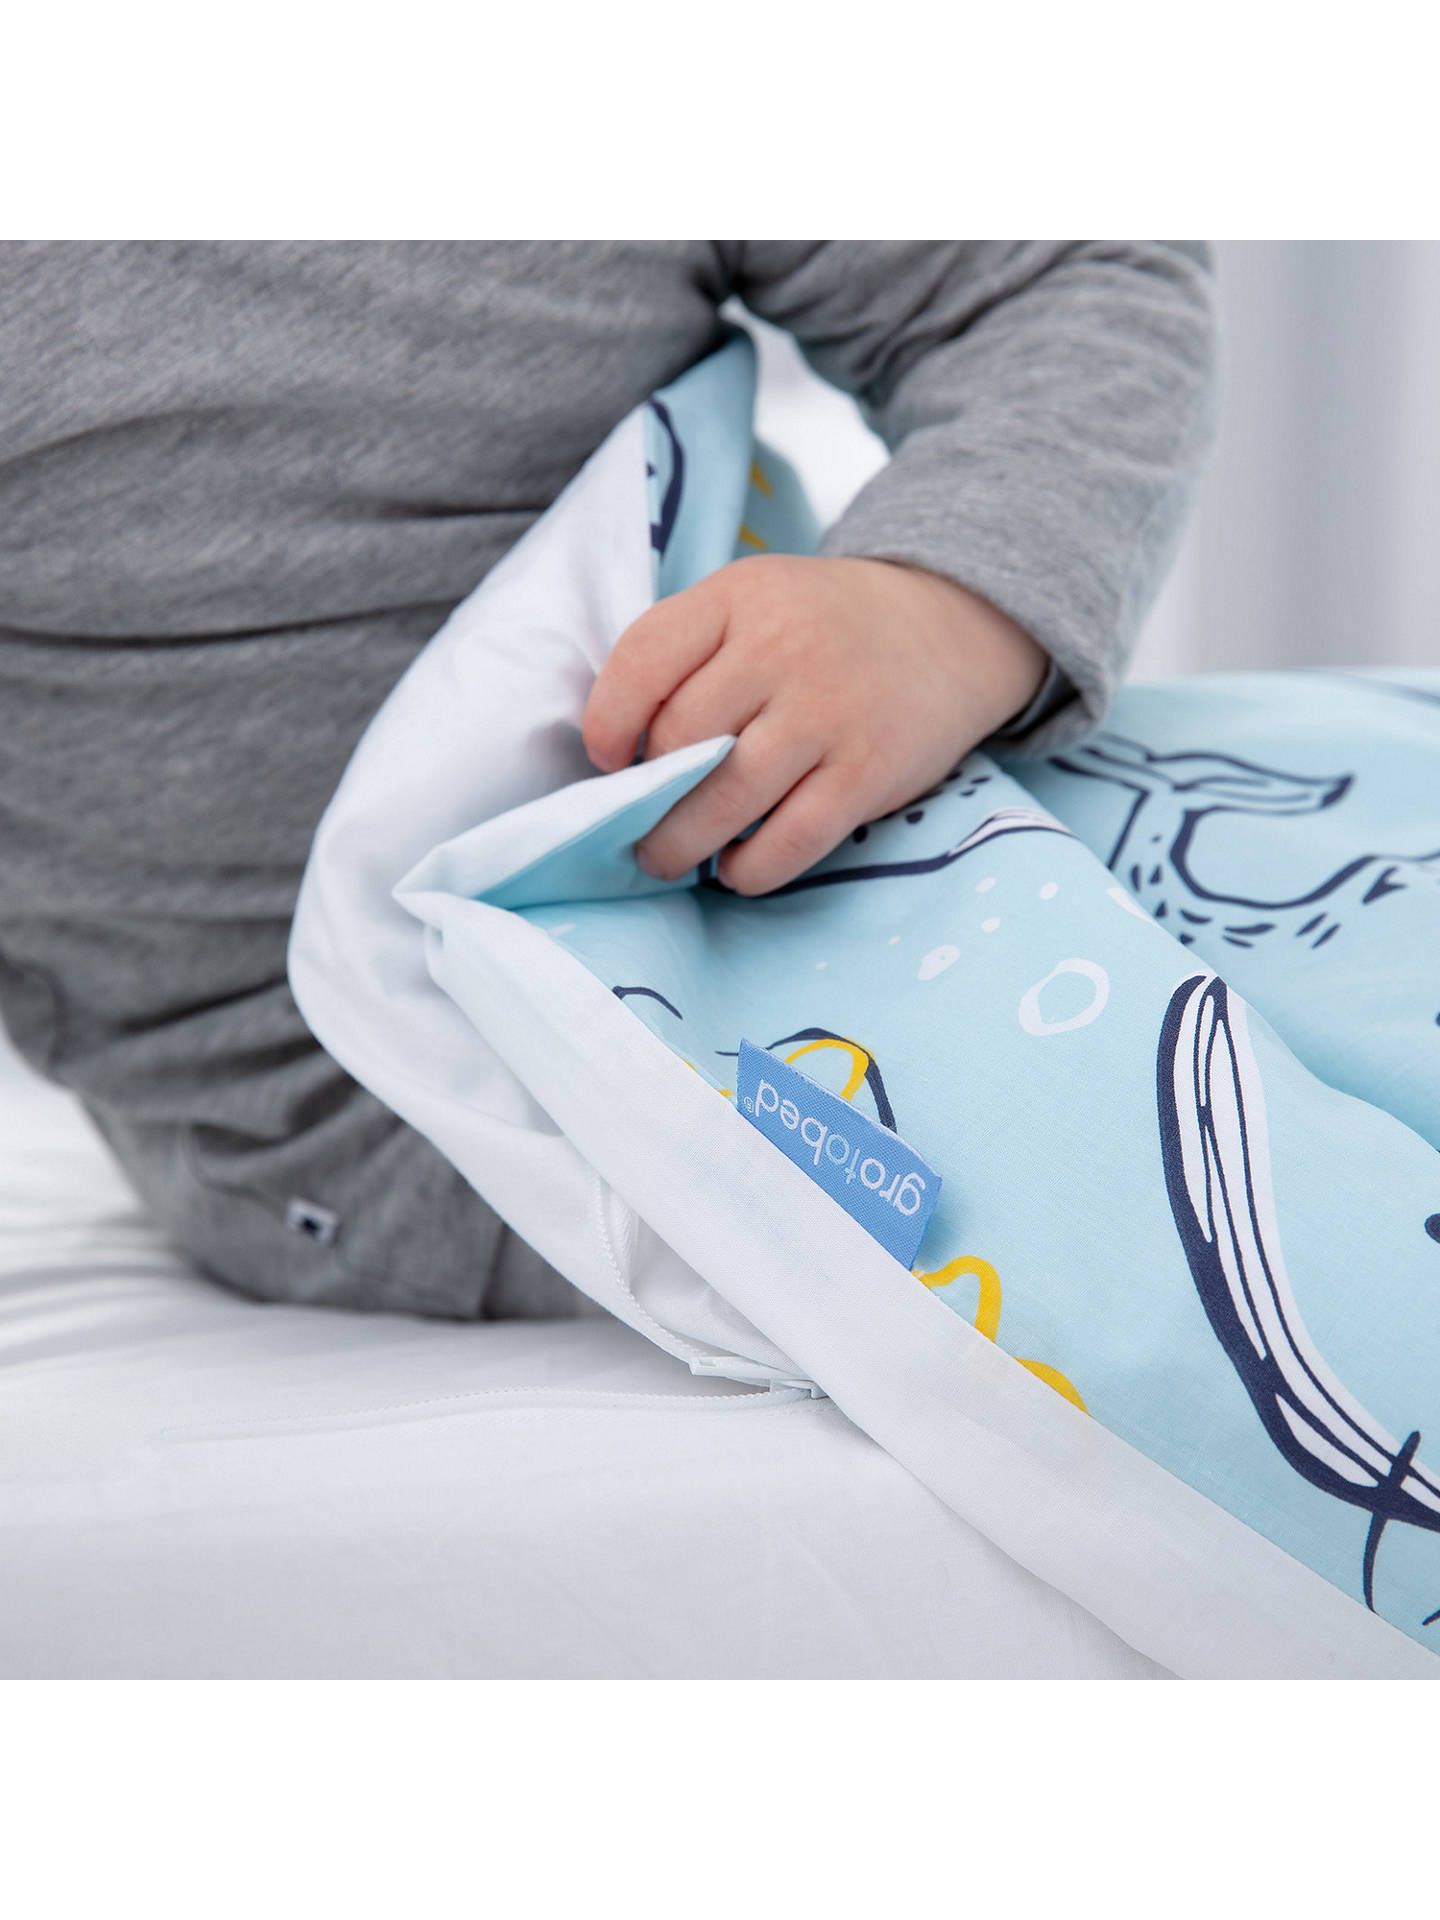 Gro To Bed Whale Watching Cotbed Duvet Cover And Pillowcase At